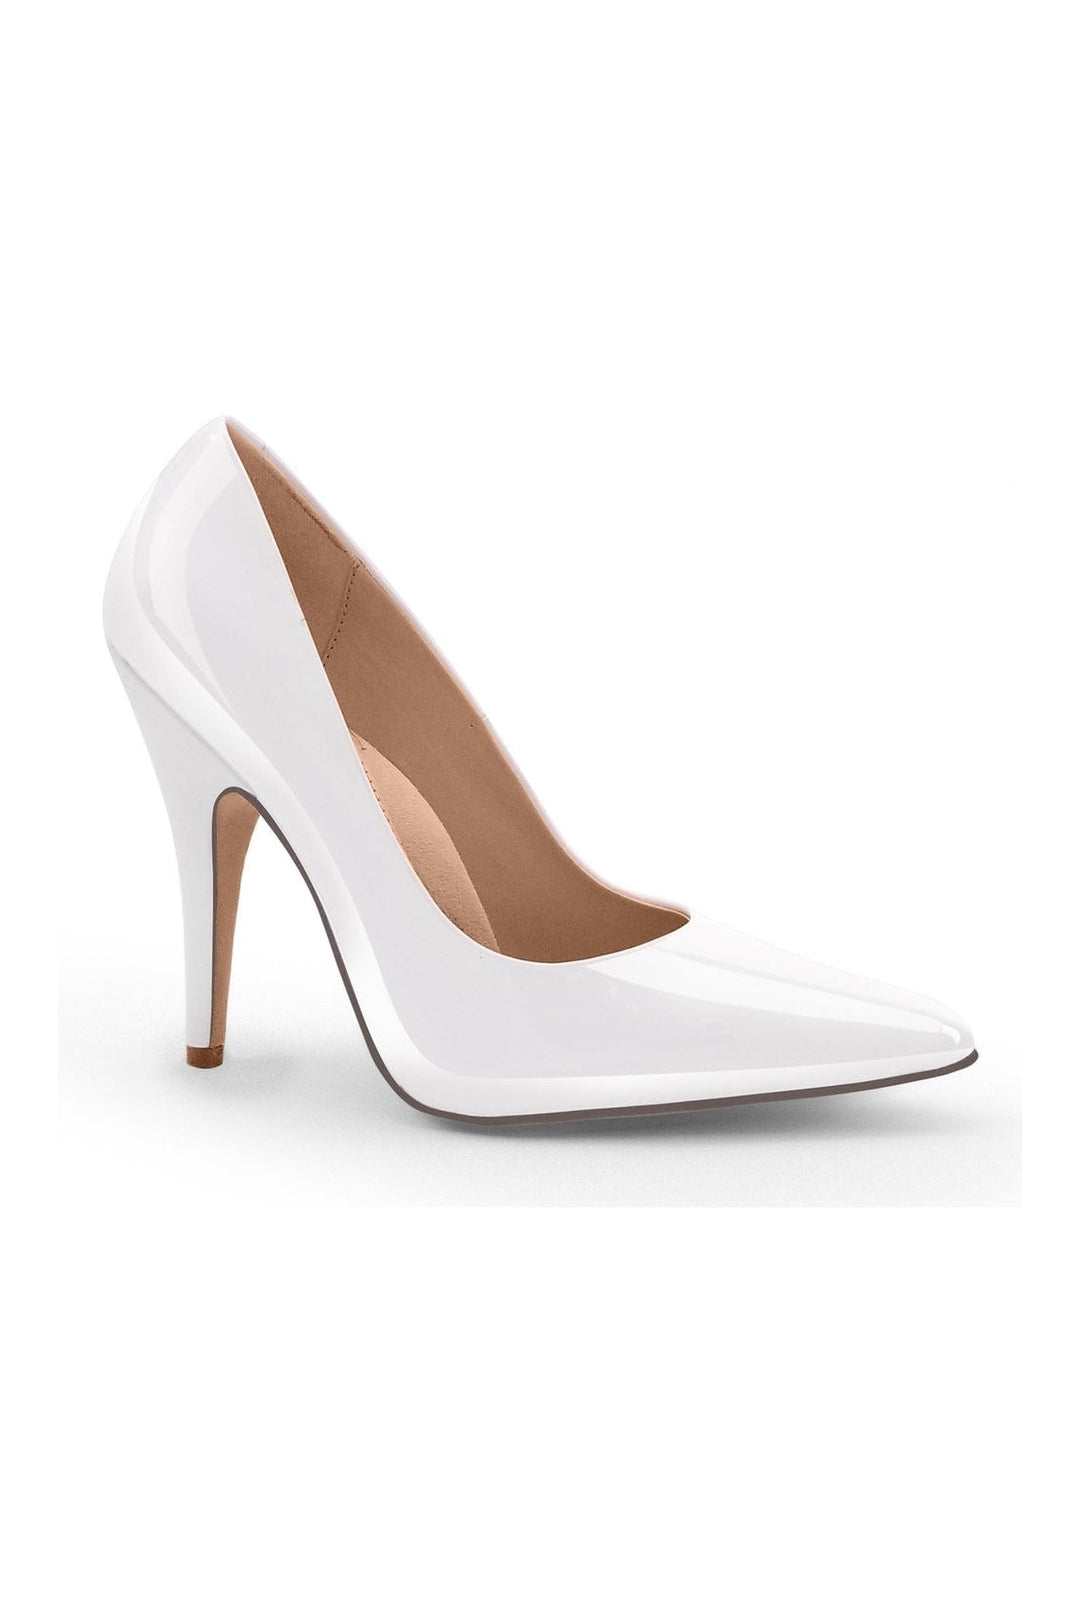 Classic Sexy Wide Width Pump-Pumps-Sexyshoes Signature-White-SEXYSHOES.COM